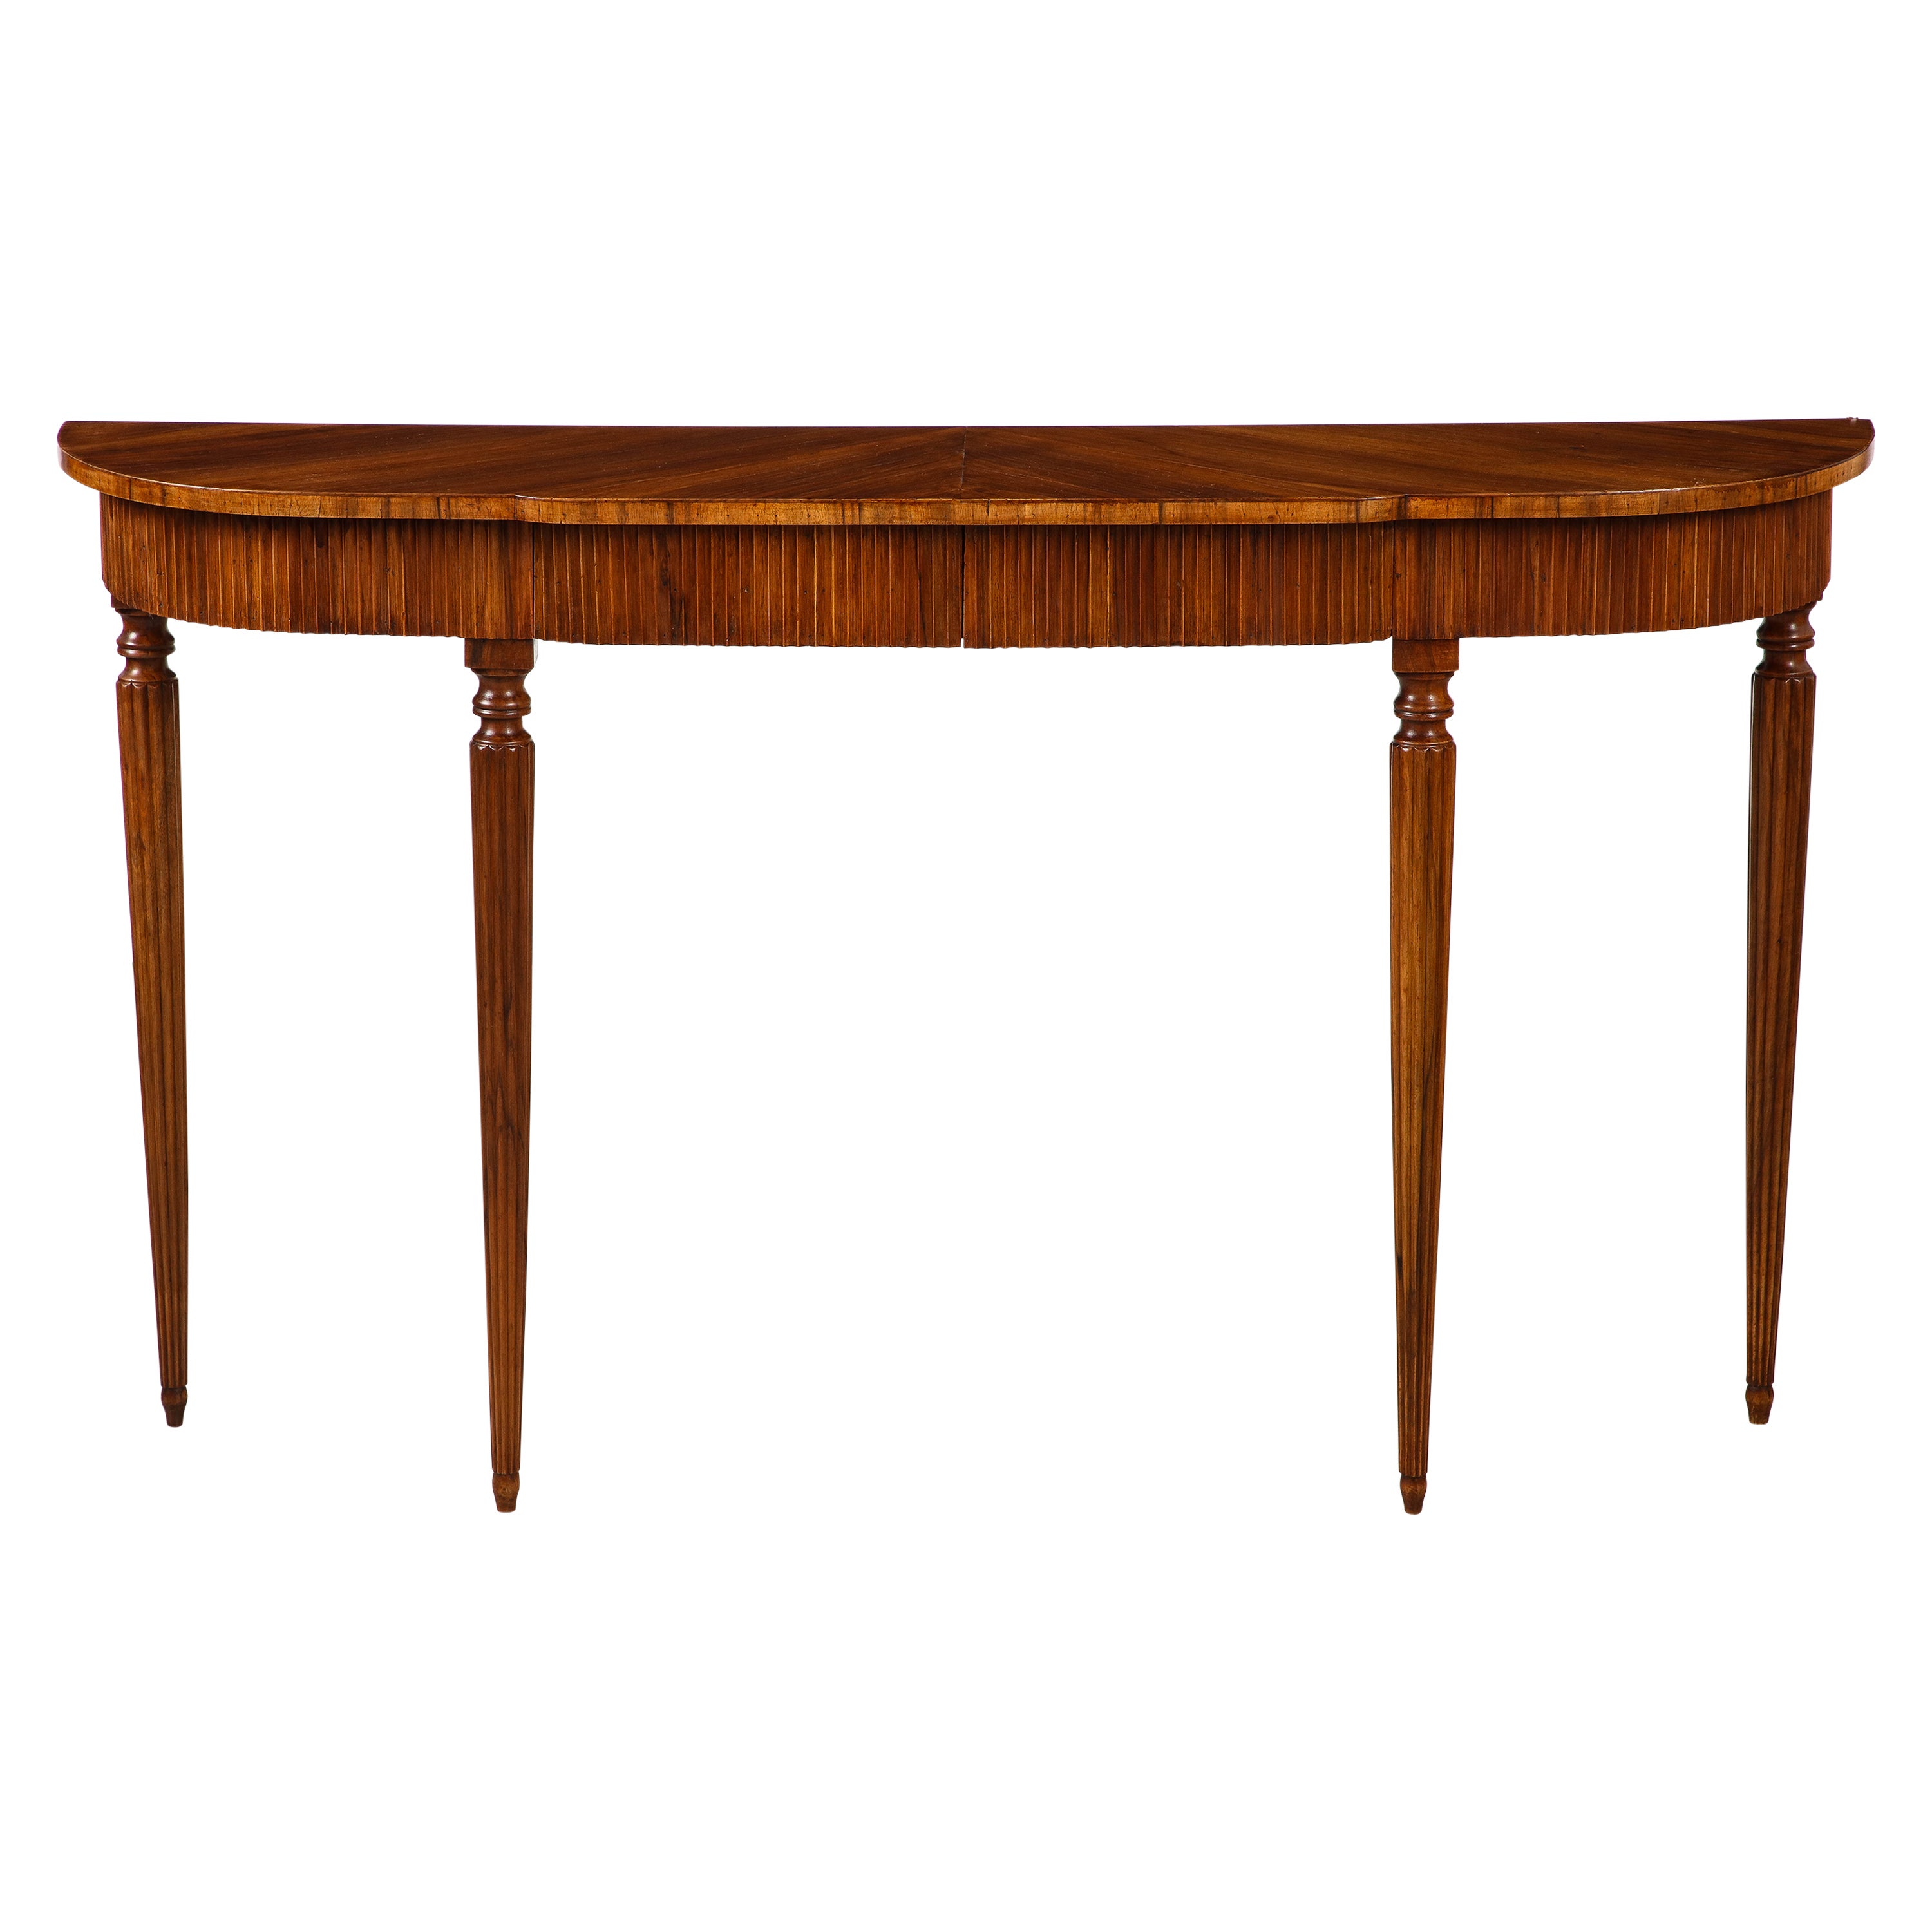 Italian Walnut Carved Console Table with Two Drawers, Italy circa 1930